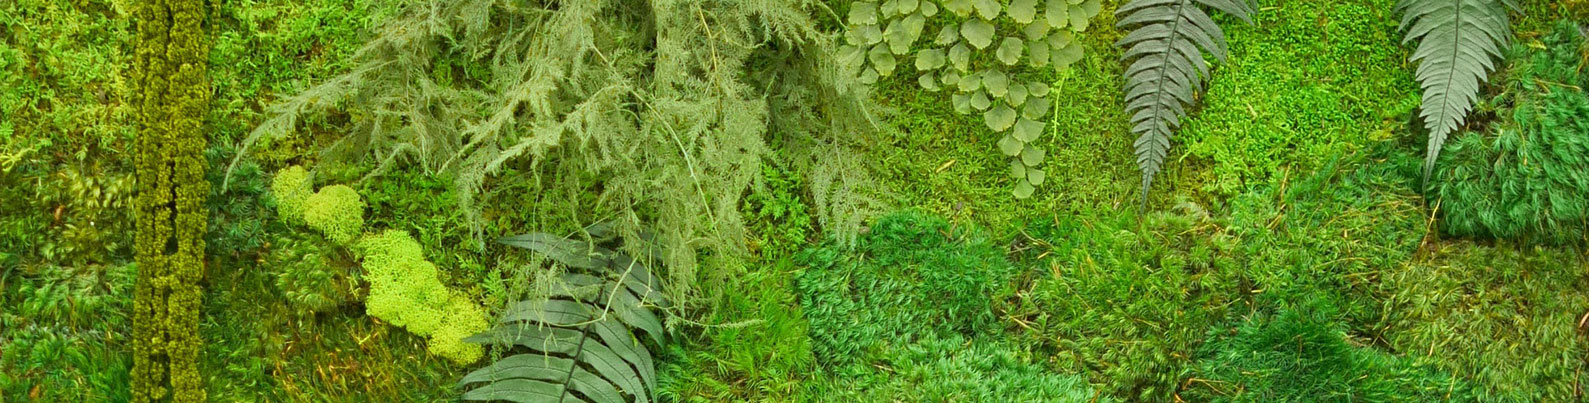 Moss Wall Art by WabiMoss  Green wall art for your interior space.